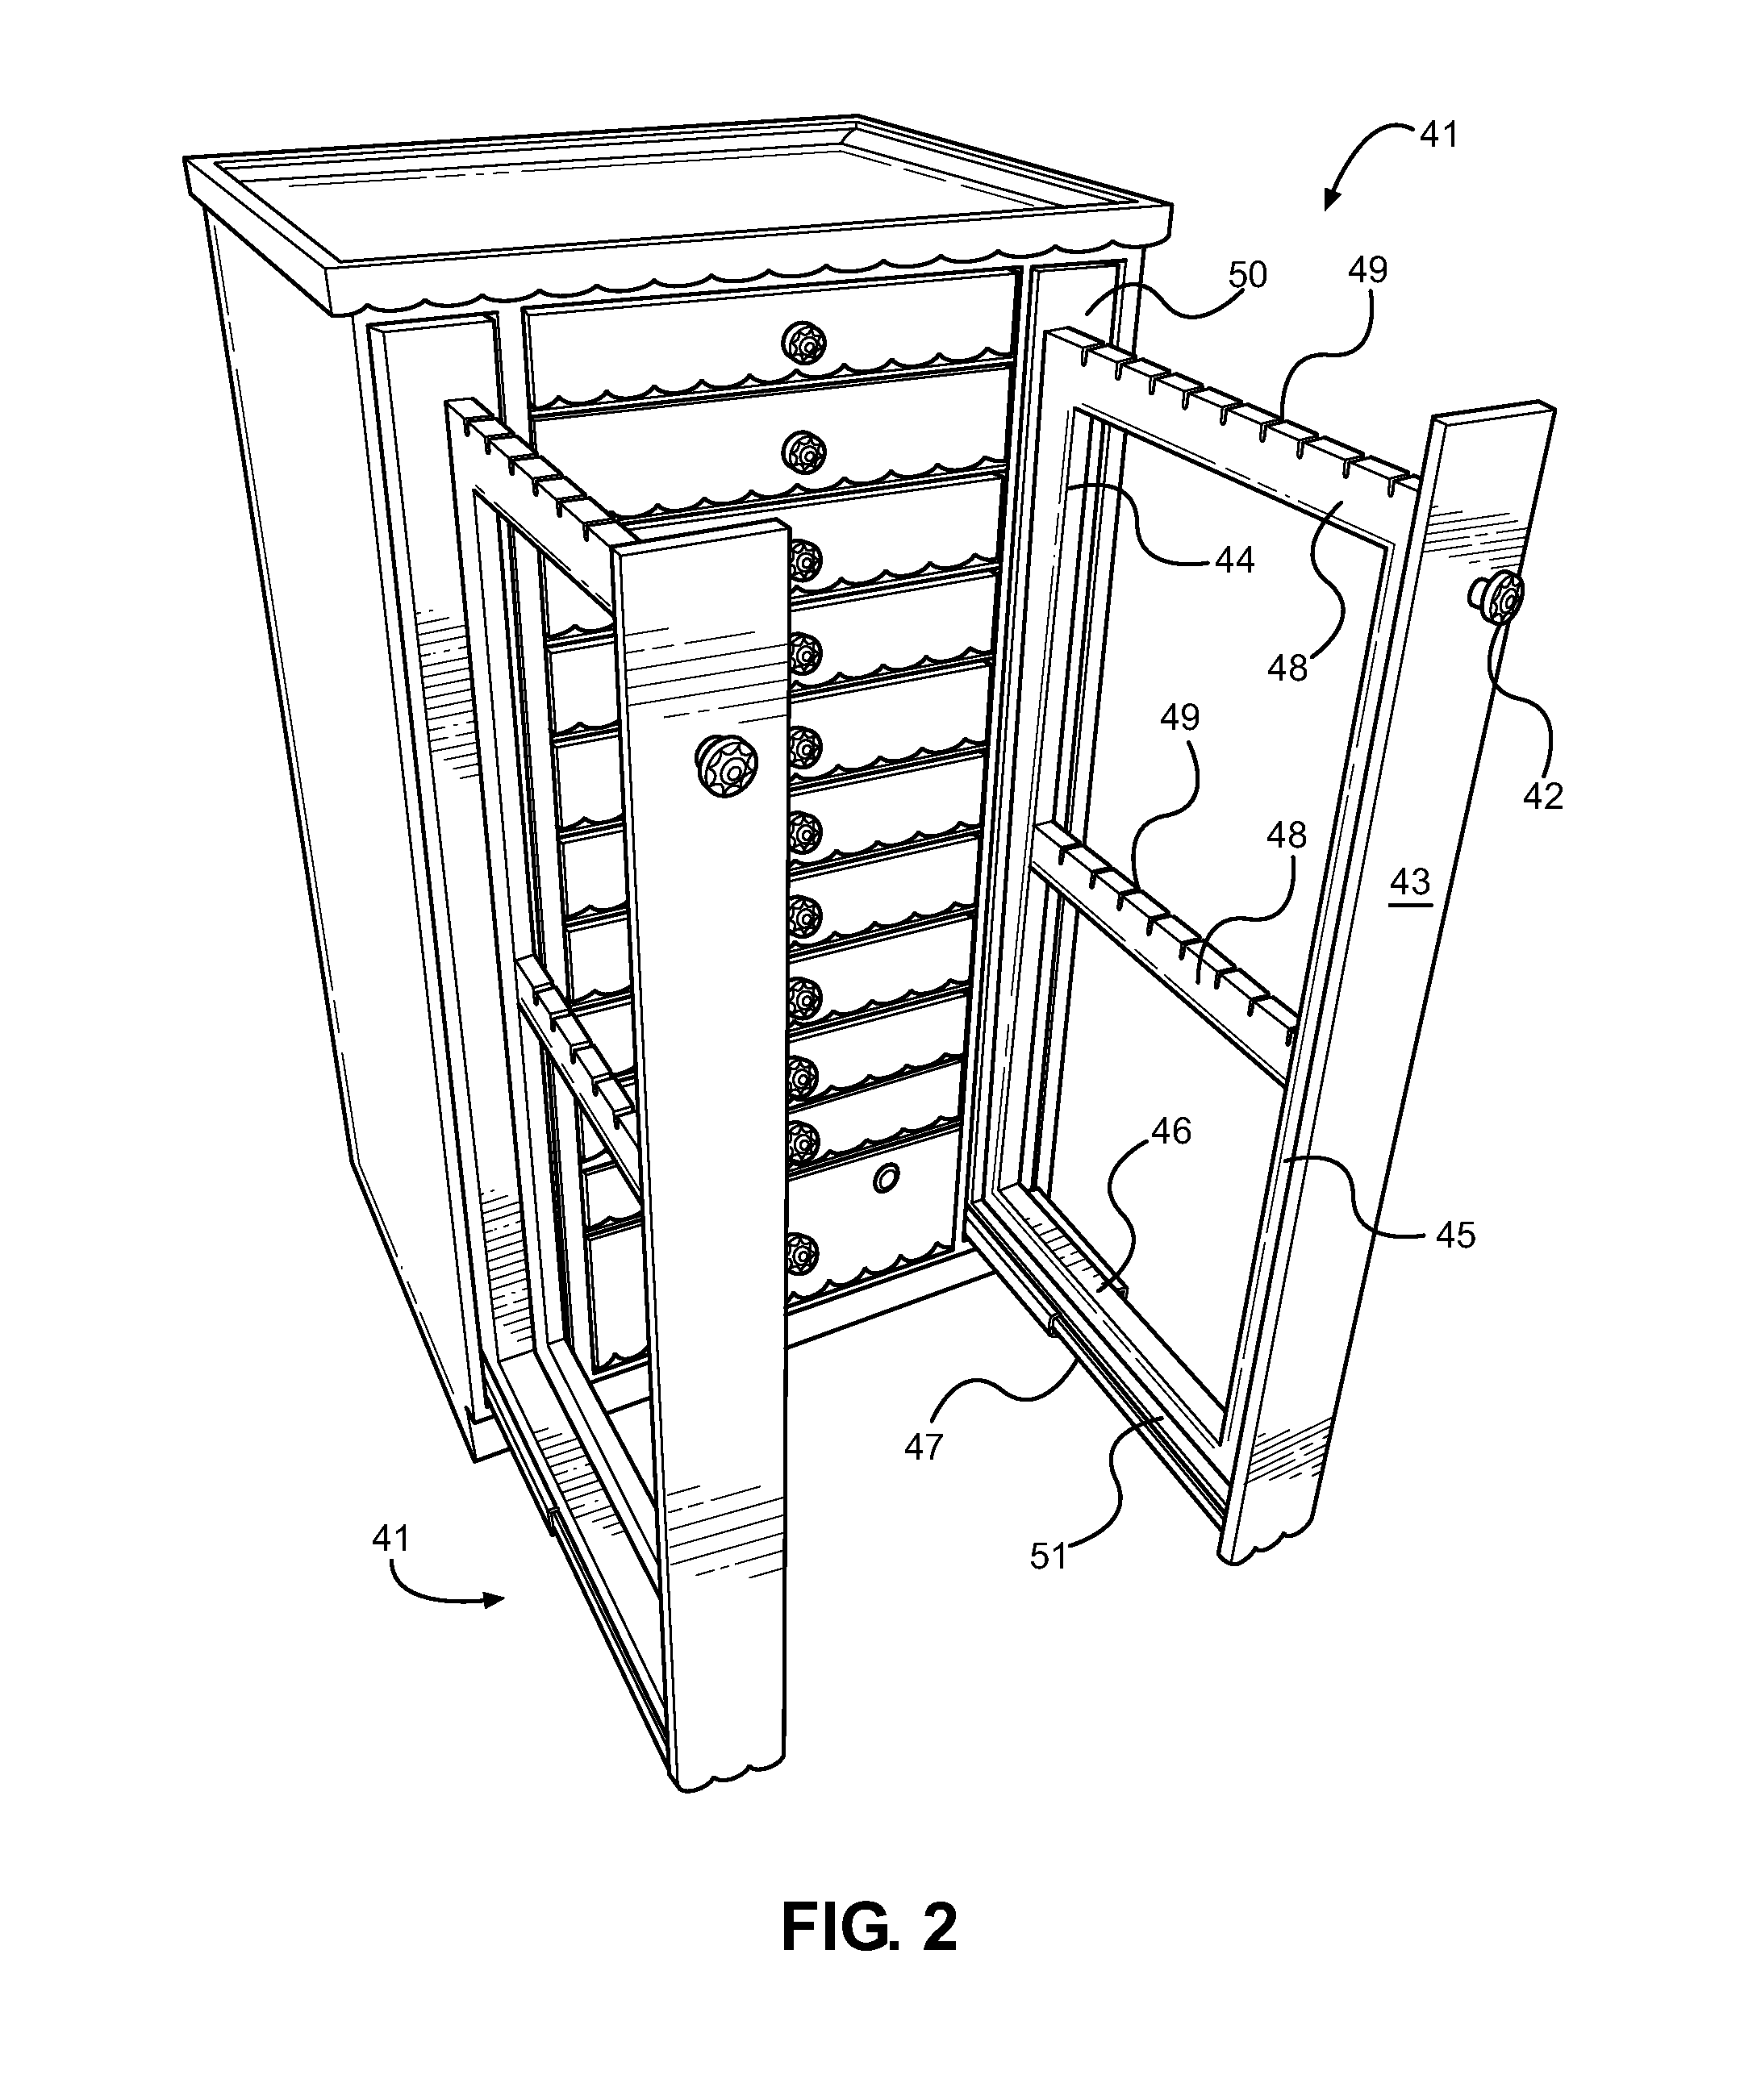 Jewelry and Accessory Storage Cabinet and Method of Organization